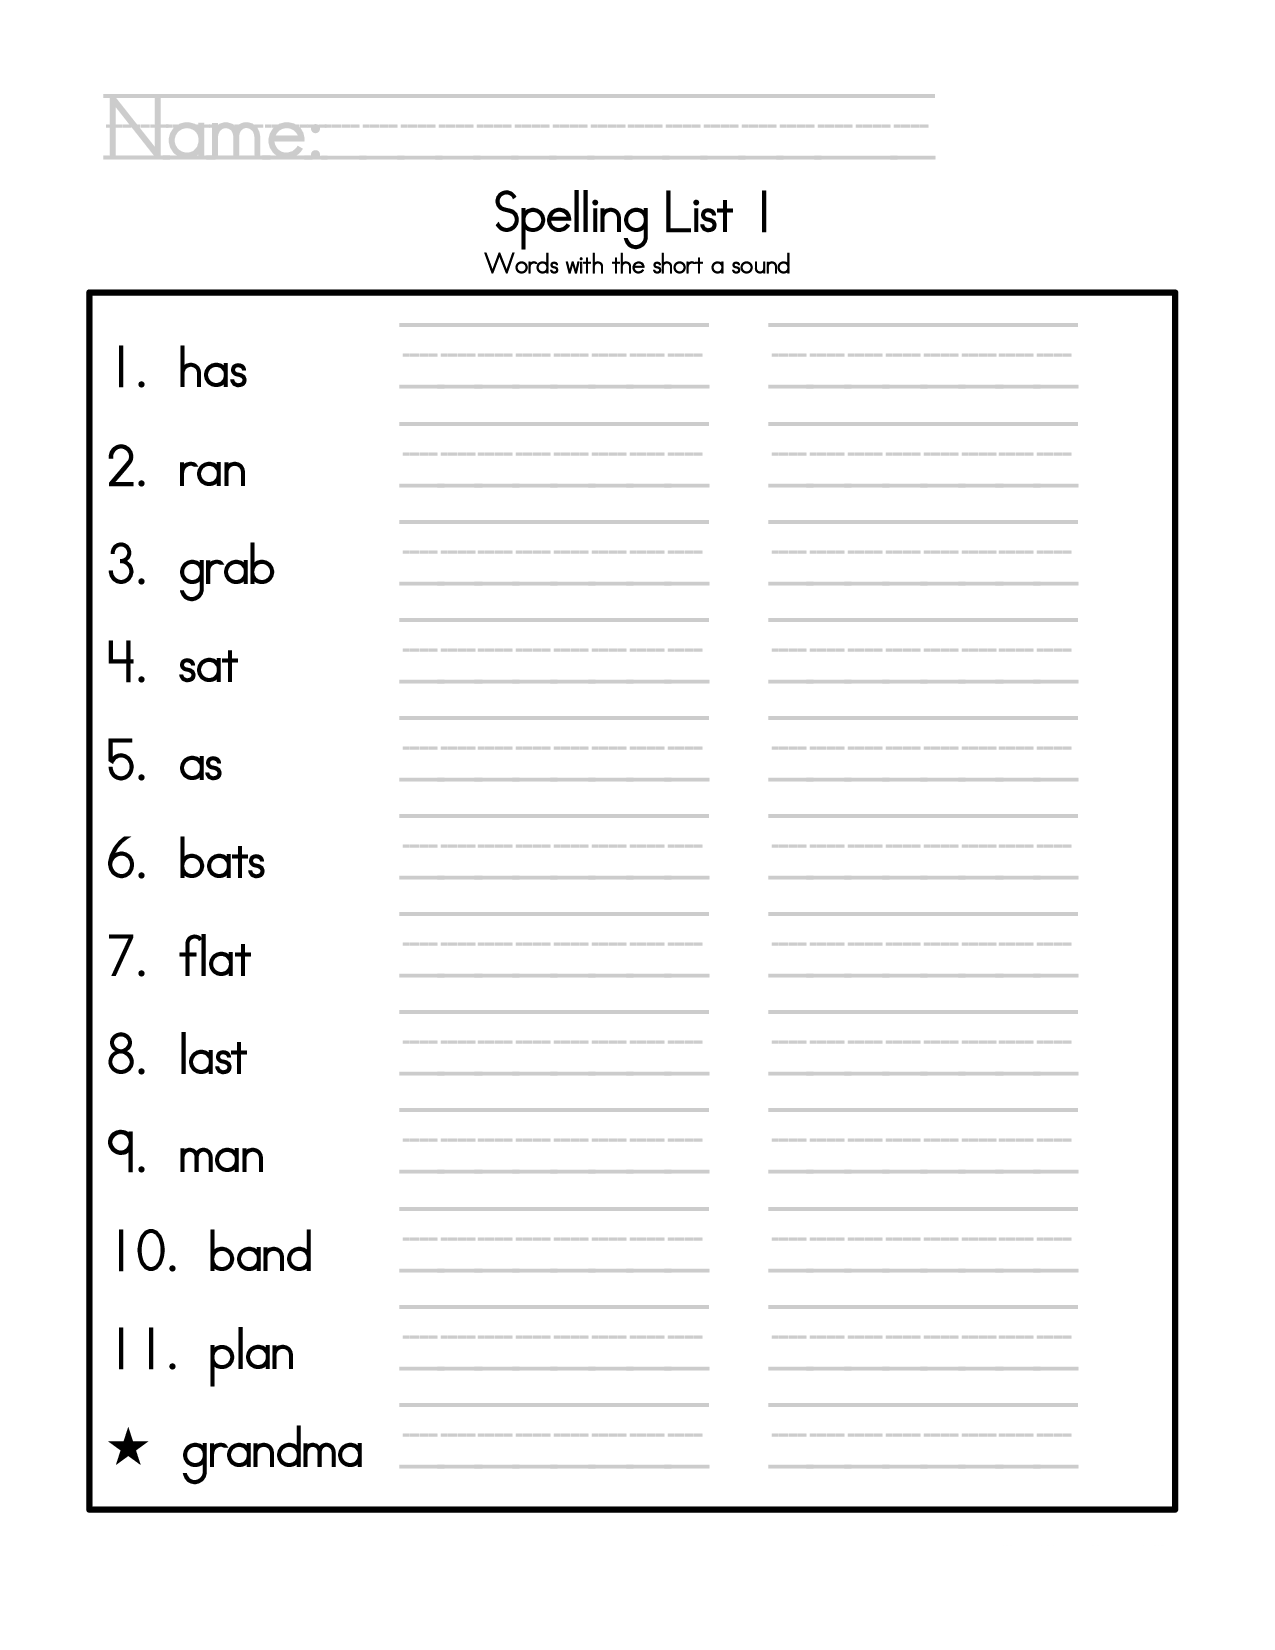 2nd Grade Spelling Worksheets - Best Coloring Pages For Kids